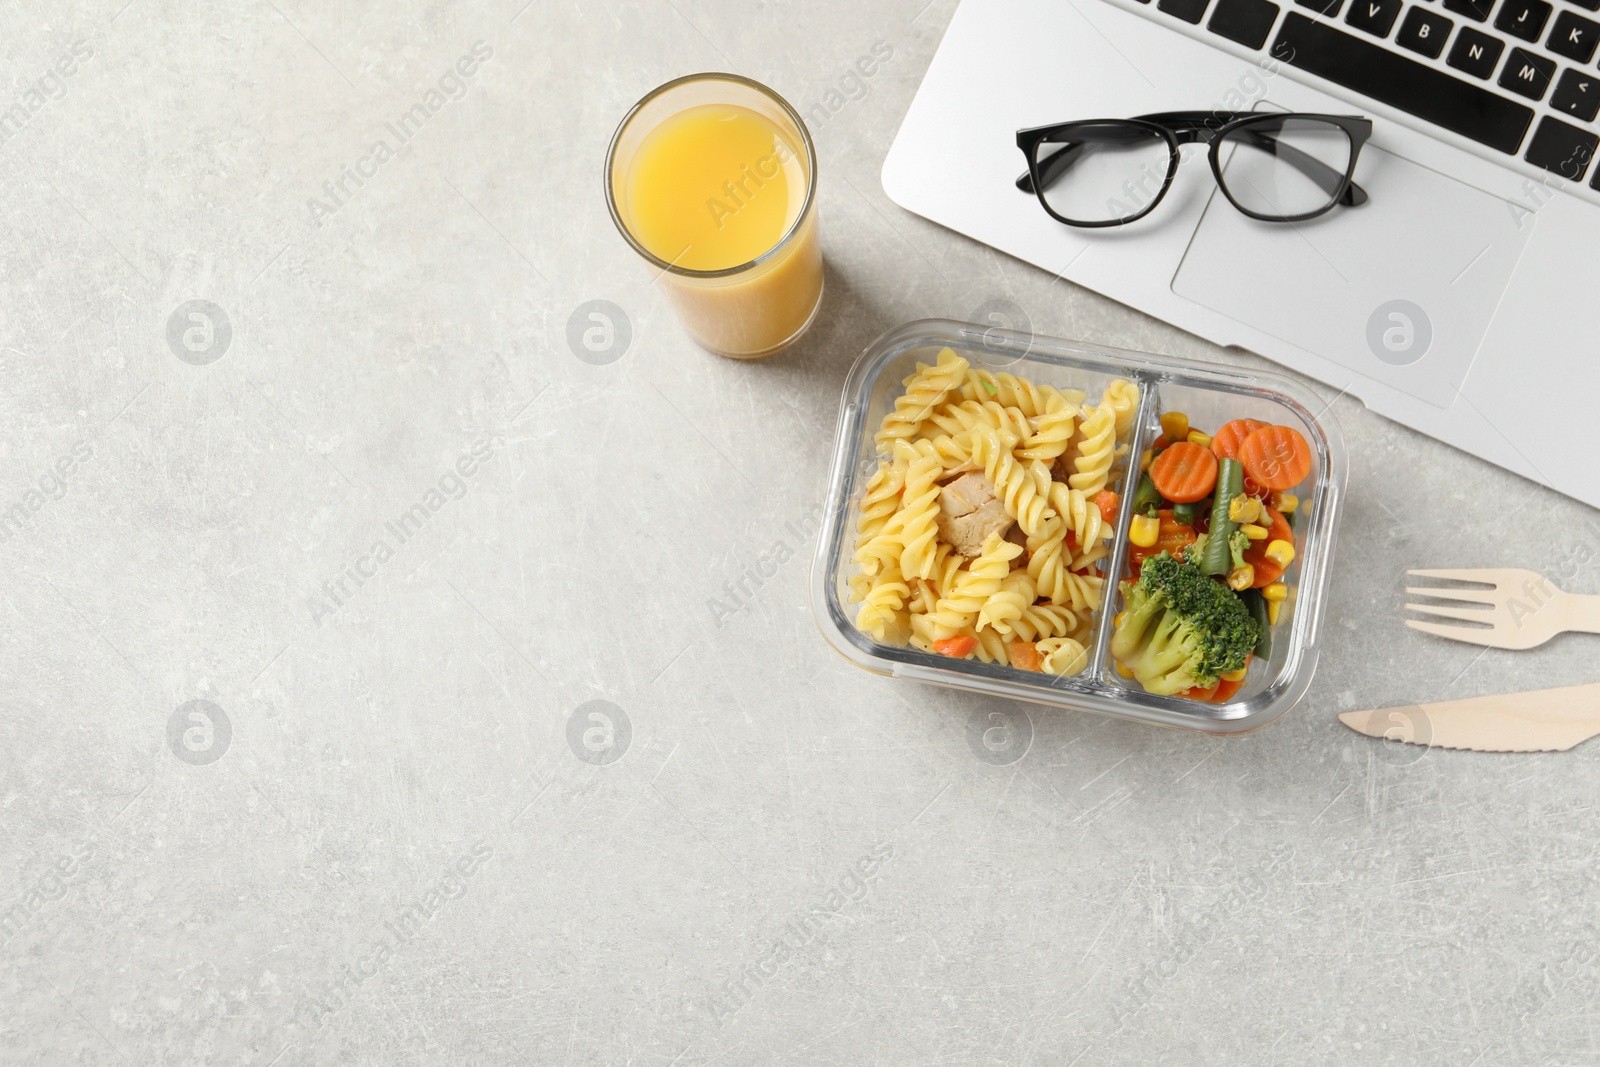 Photo of Container of tasty food, laptop, glasses, cutlery and glass of juice on light grey table, flat lay with space for text. Business lunch